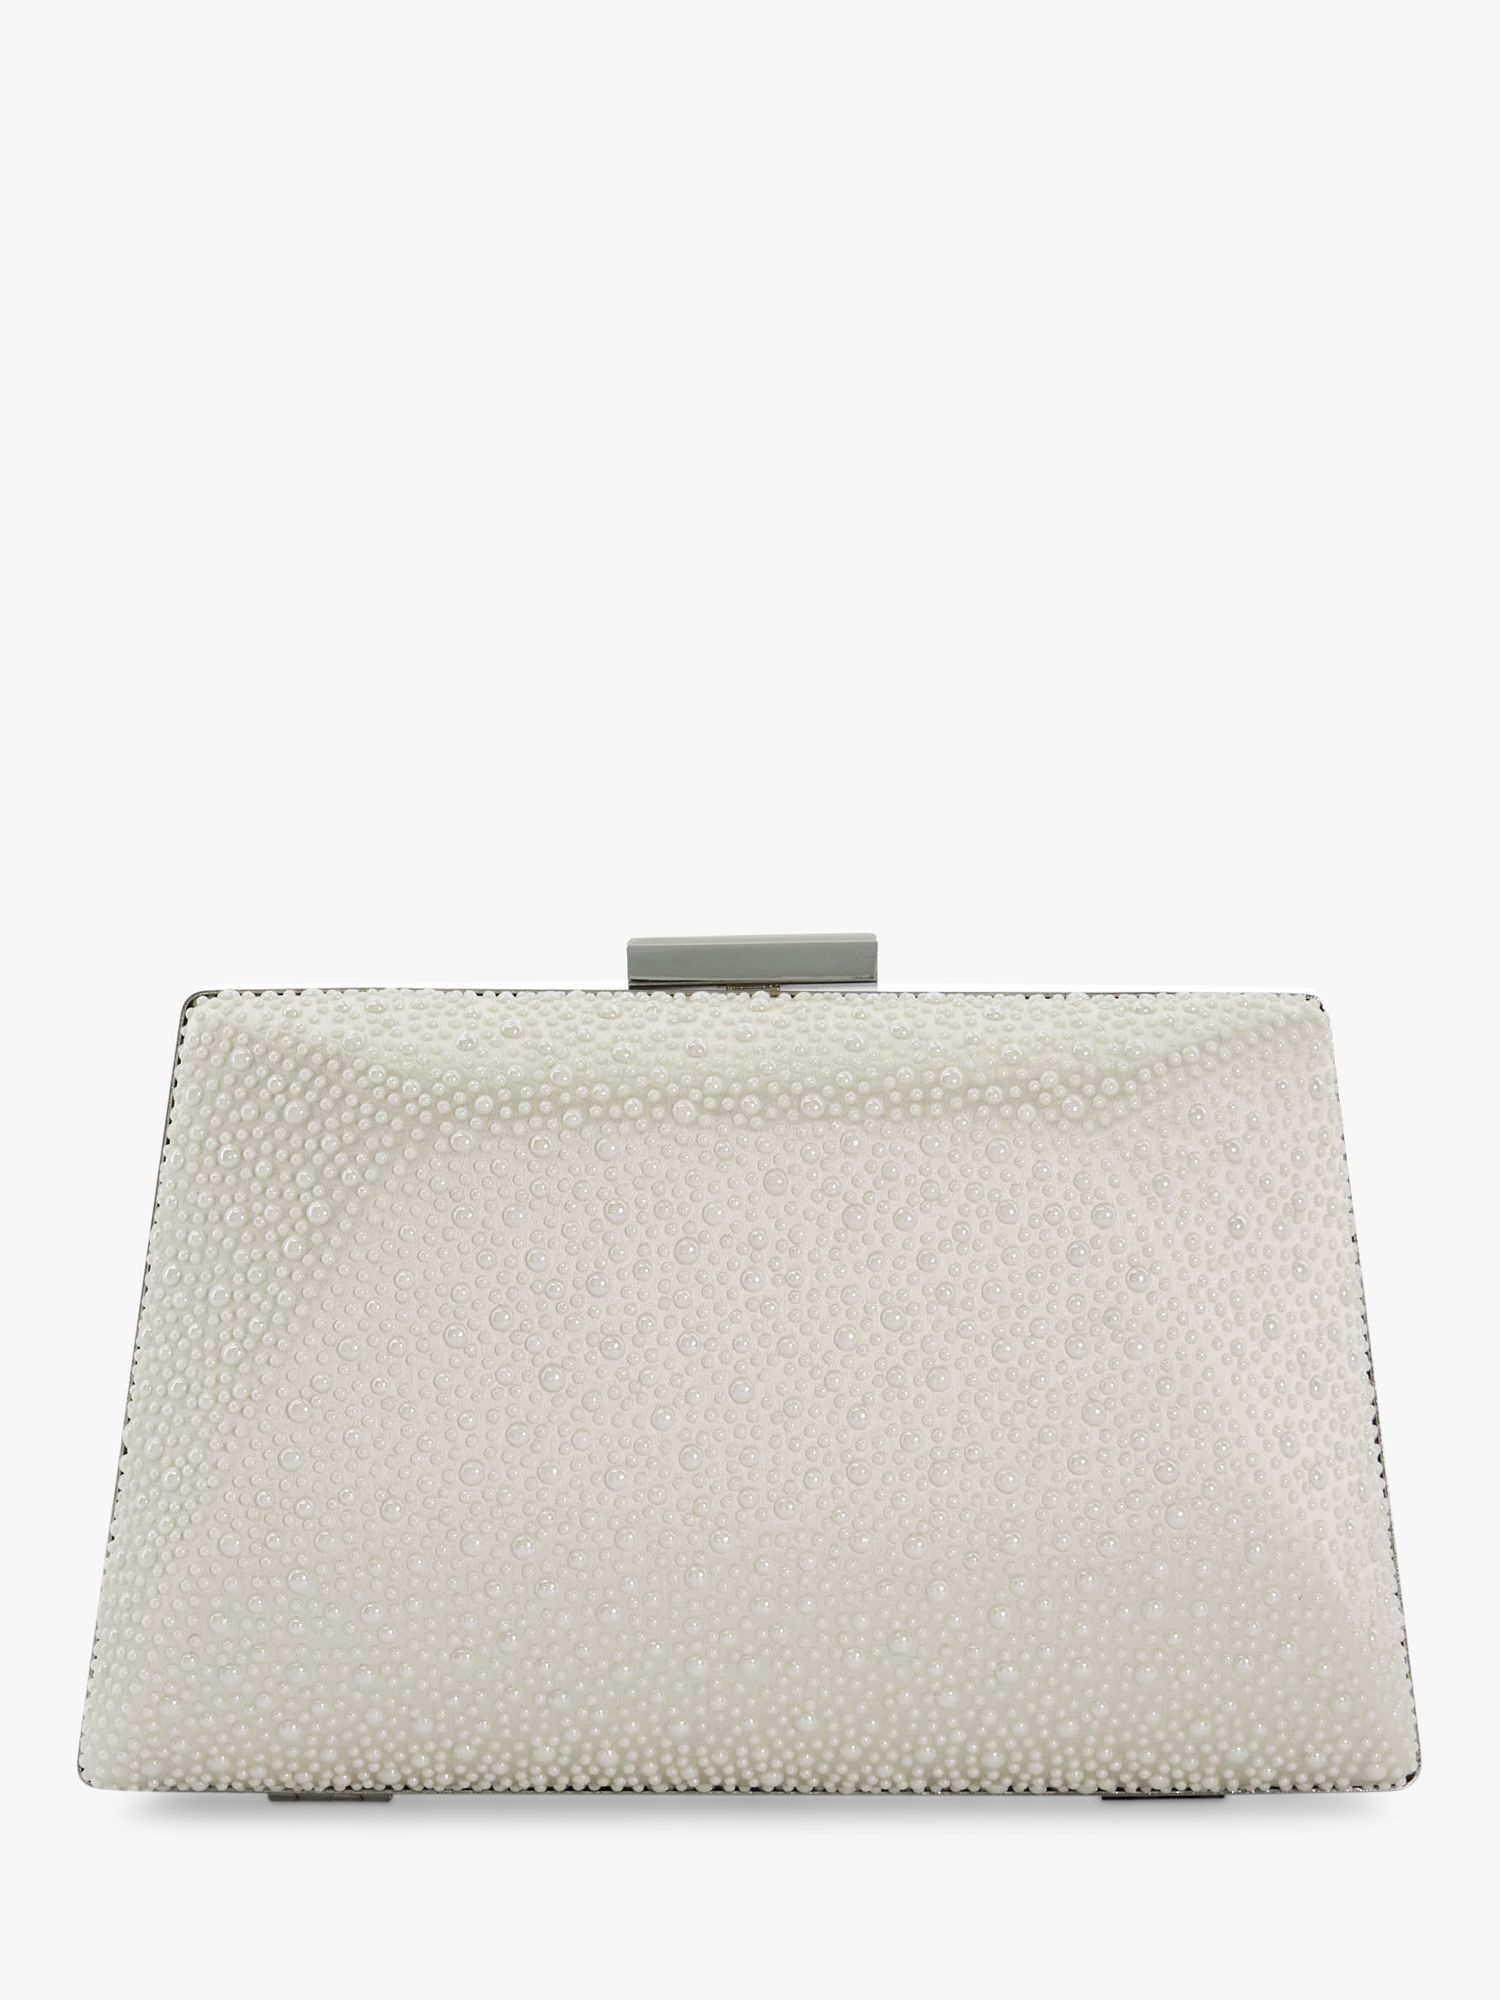 Dune Because Pearl Effect Clutch Bag, Ivory at John Lewis & Partners